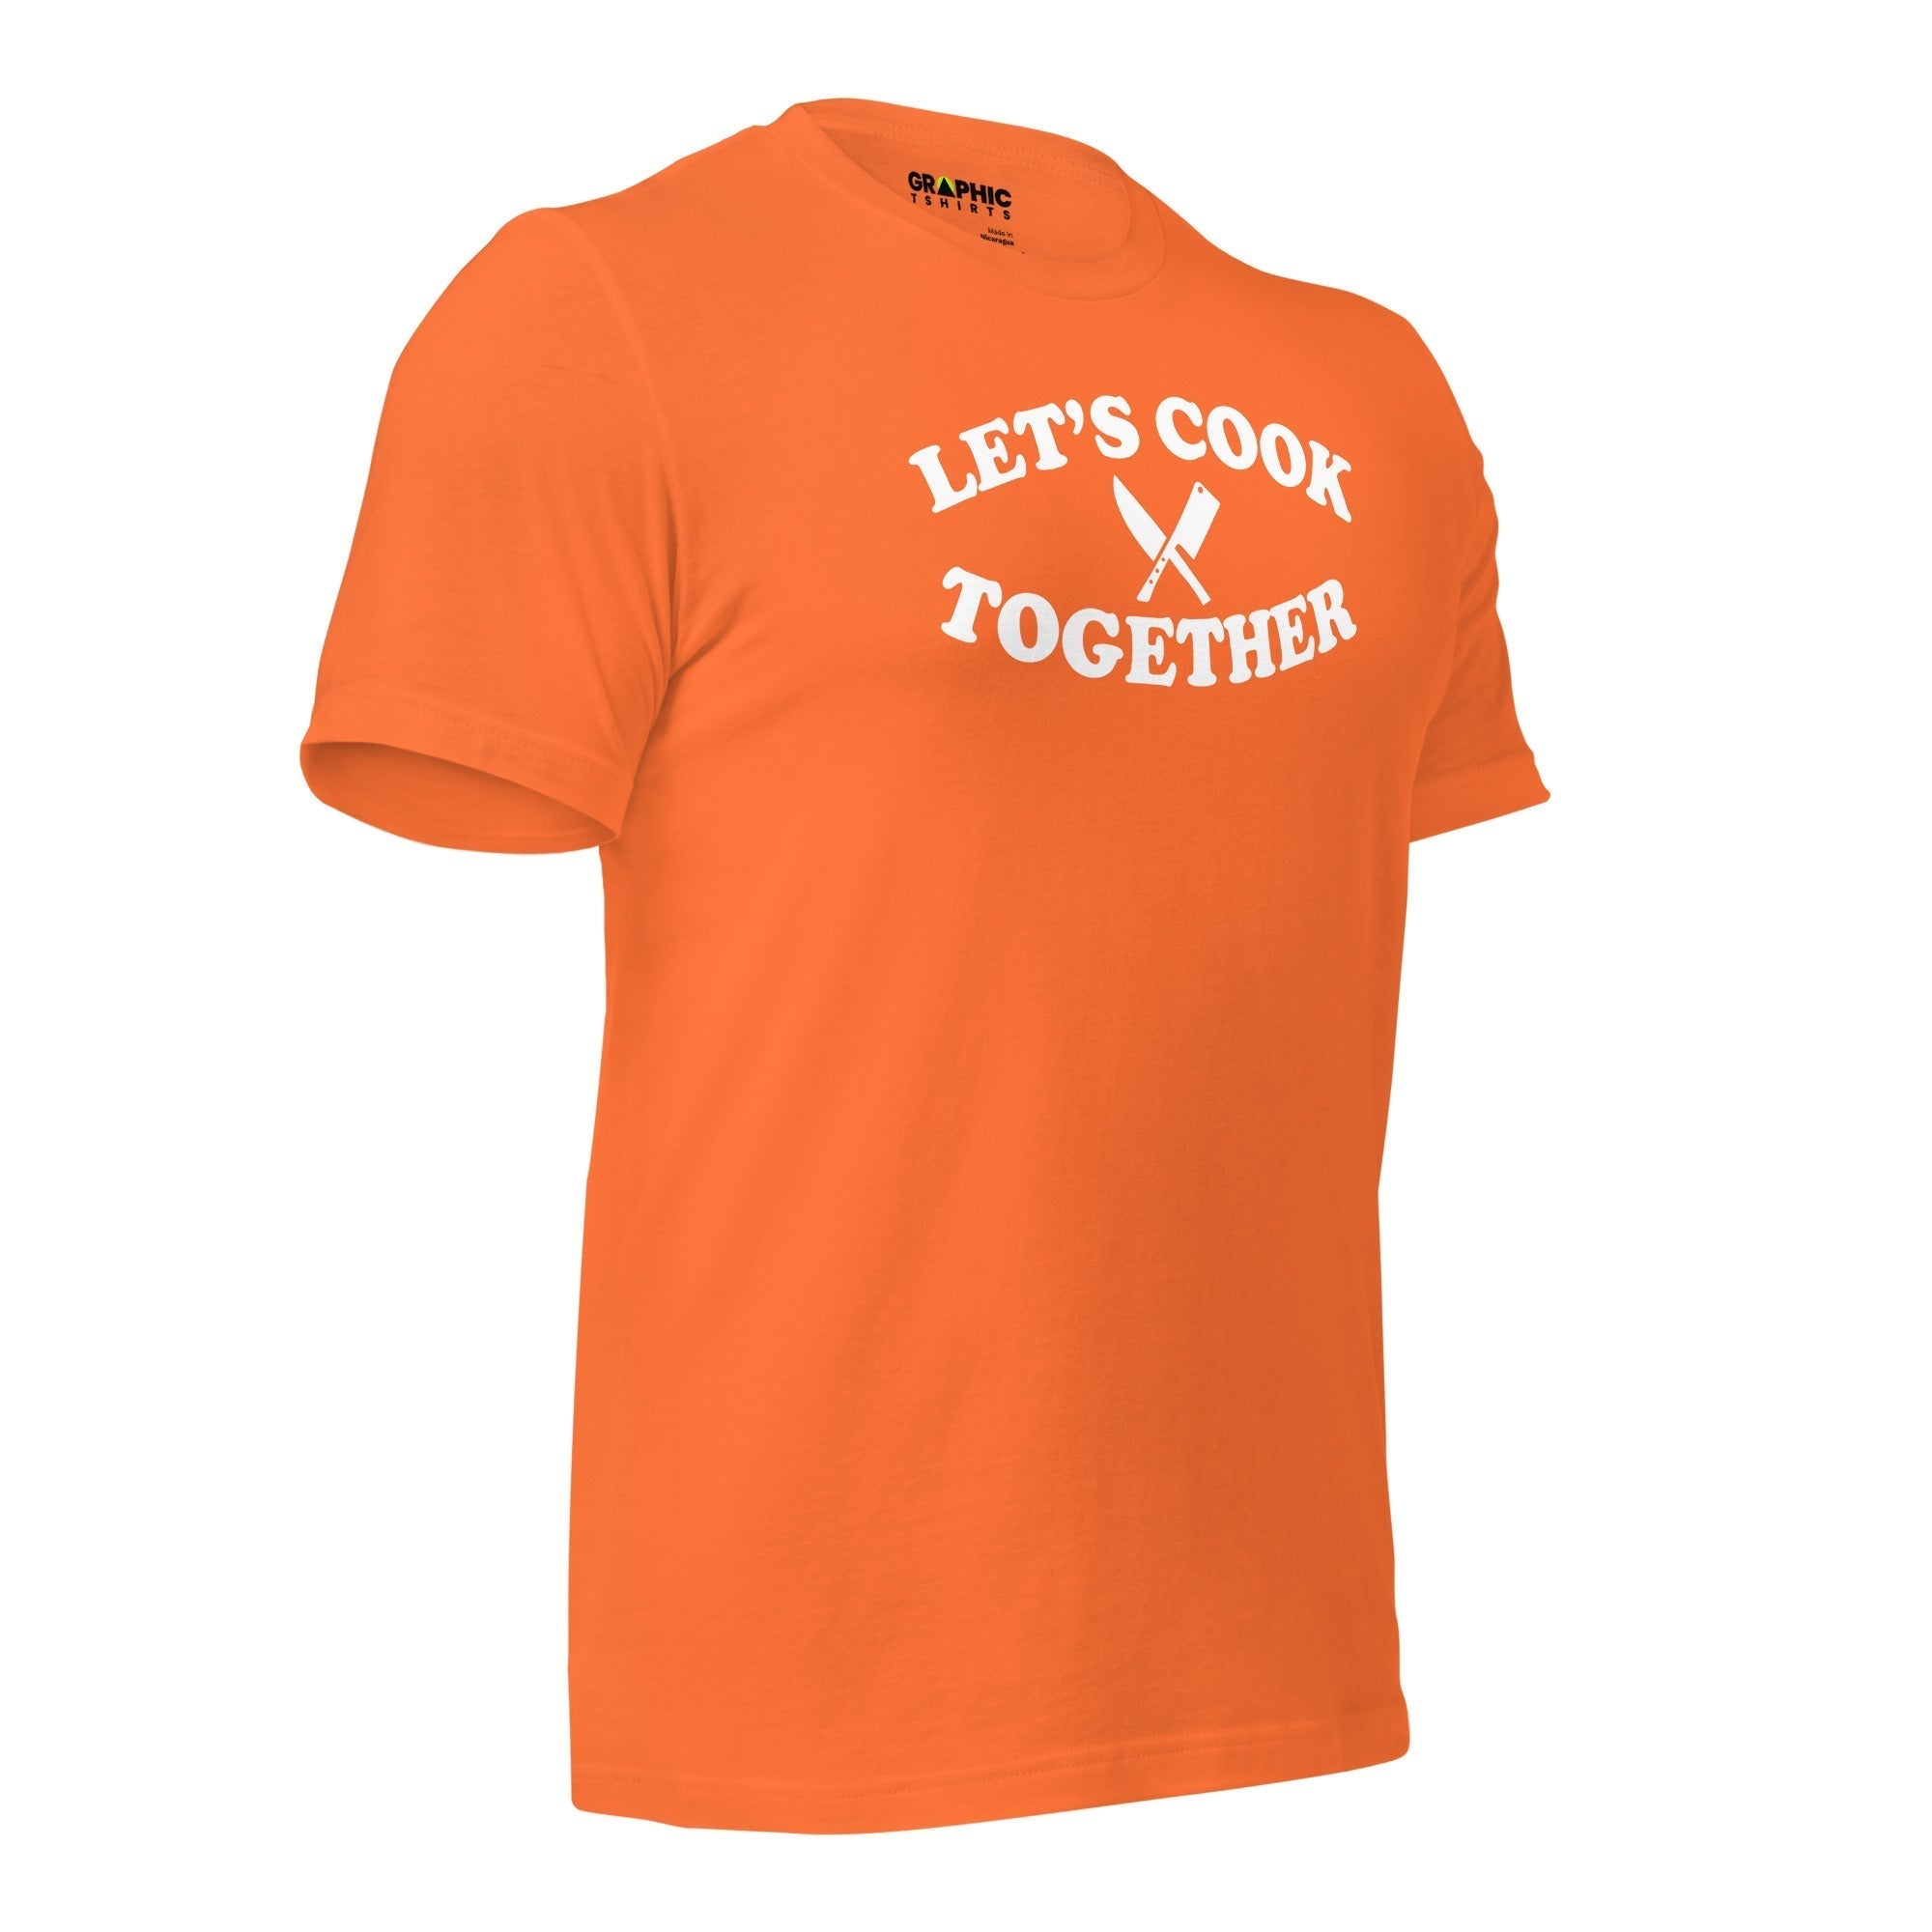 Unisex Staple T-Shirt - Let's Cook Together - GRAPHIC T-SHIRTS